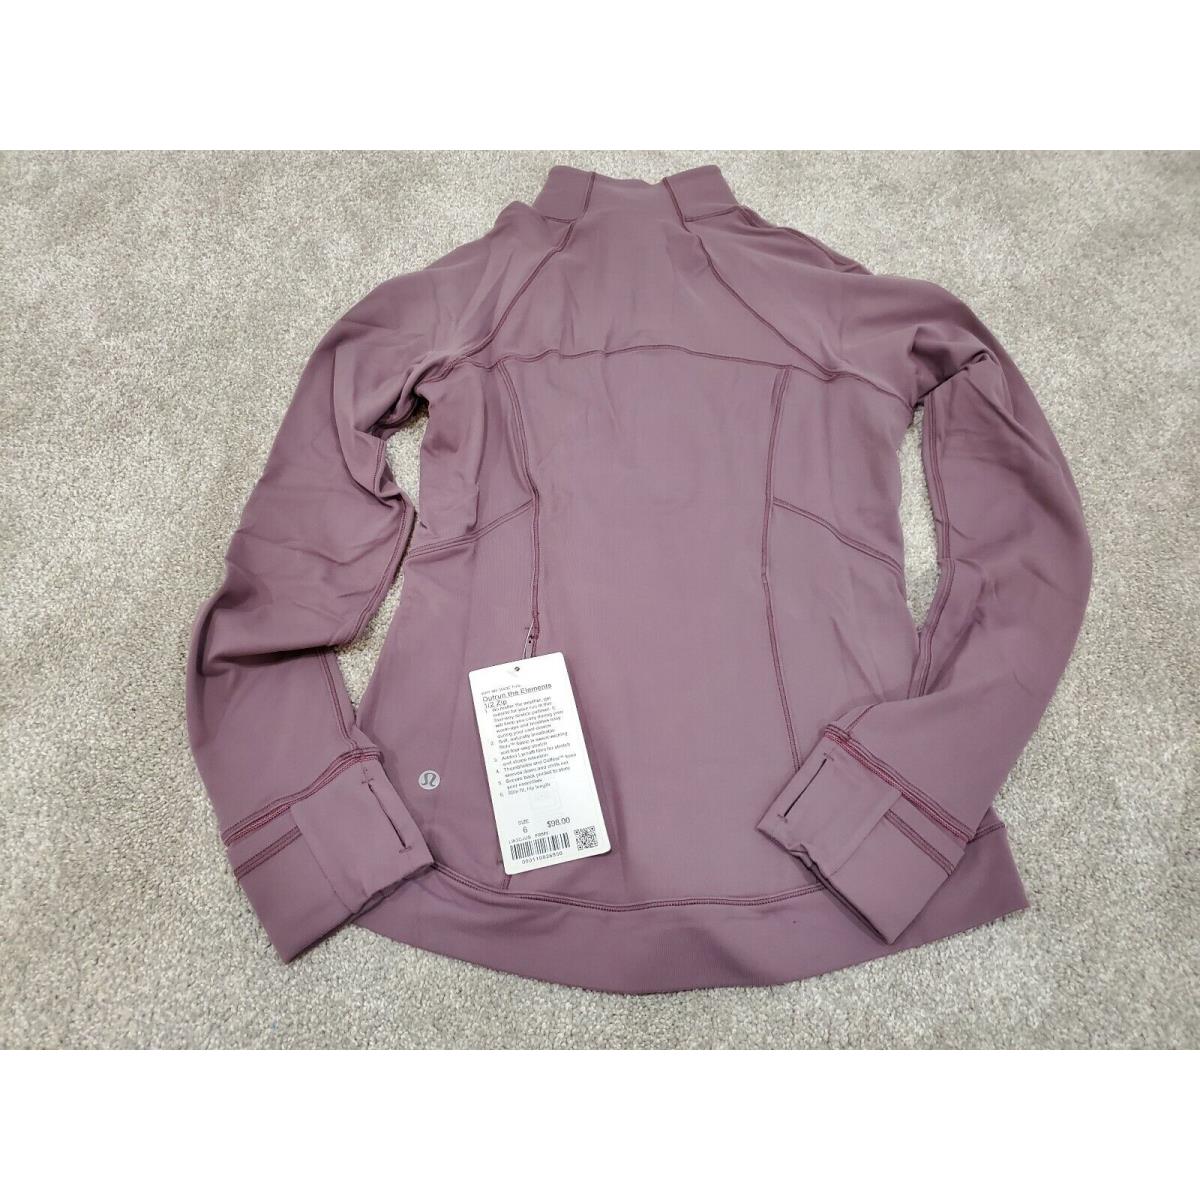 Lululemon Outrun The Elements 1/2 Zip Size 6